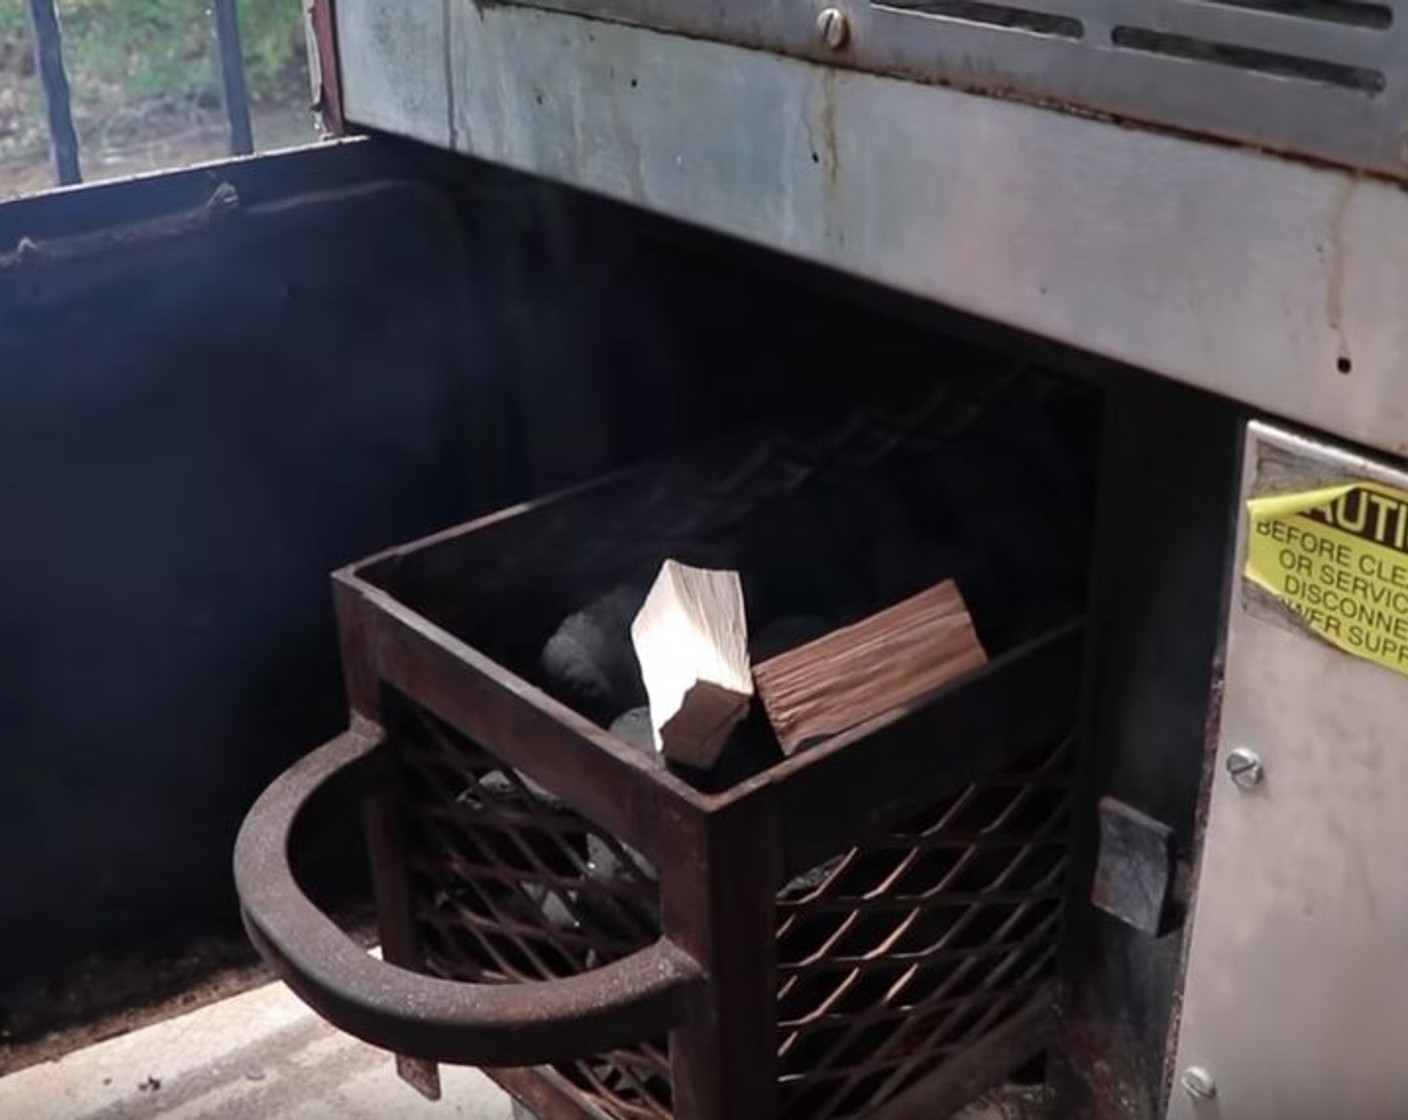 step 1 Prepare smoker for indirect cooking at 250 degrees F (121 degrees C). When smoker reaches optimal temperature, place chunks of hickory and pecan wood directly on hot coals for smoke flavor.